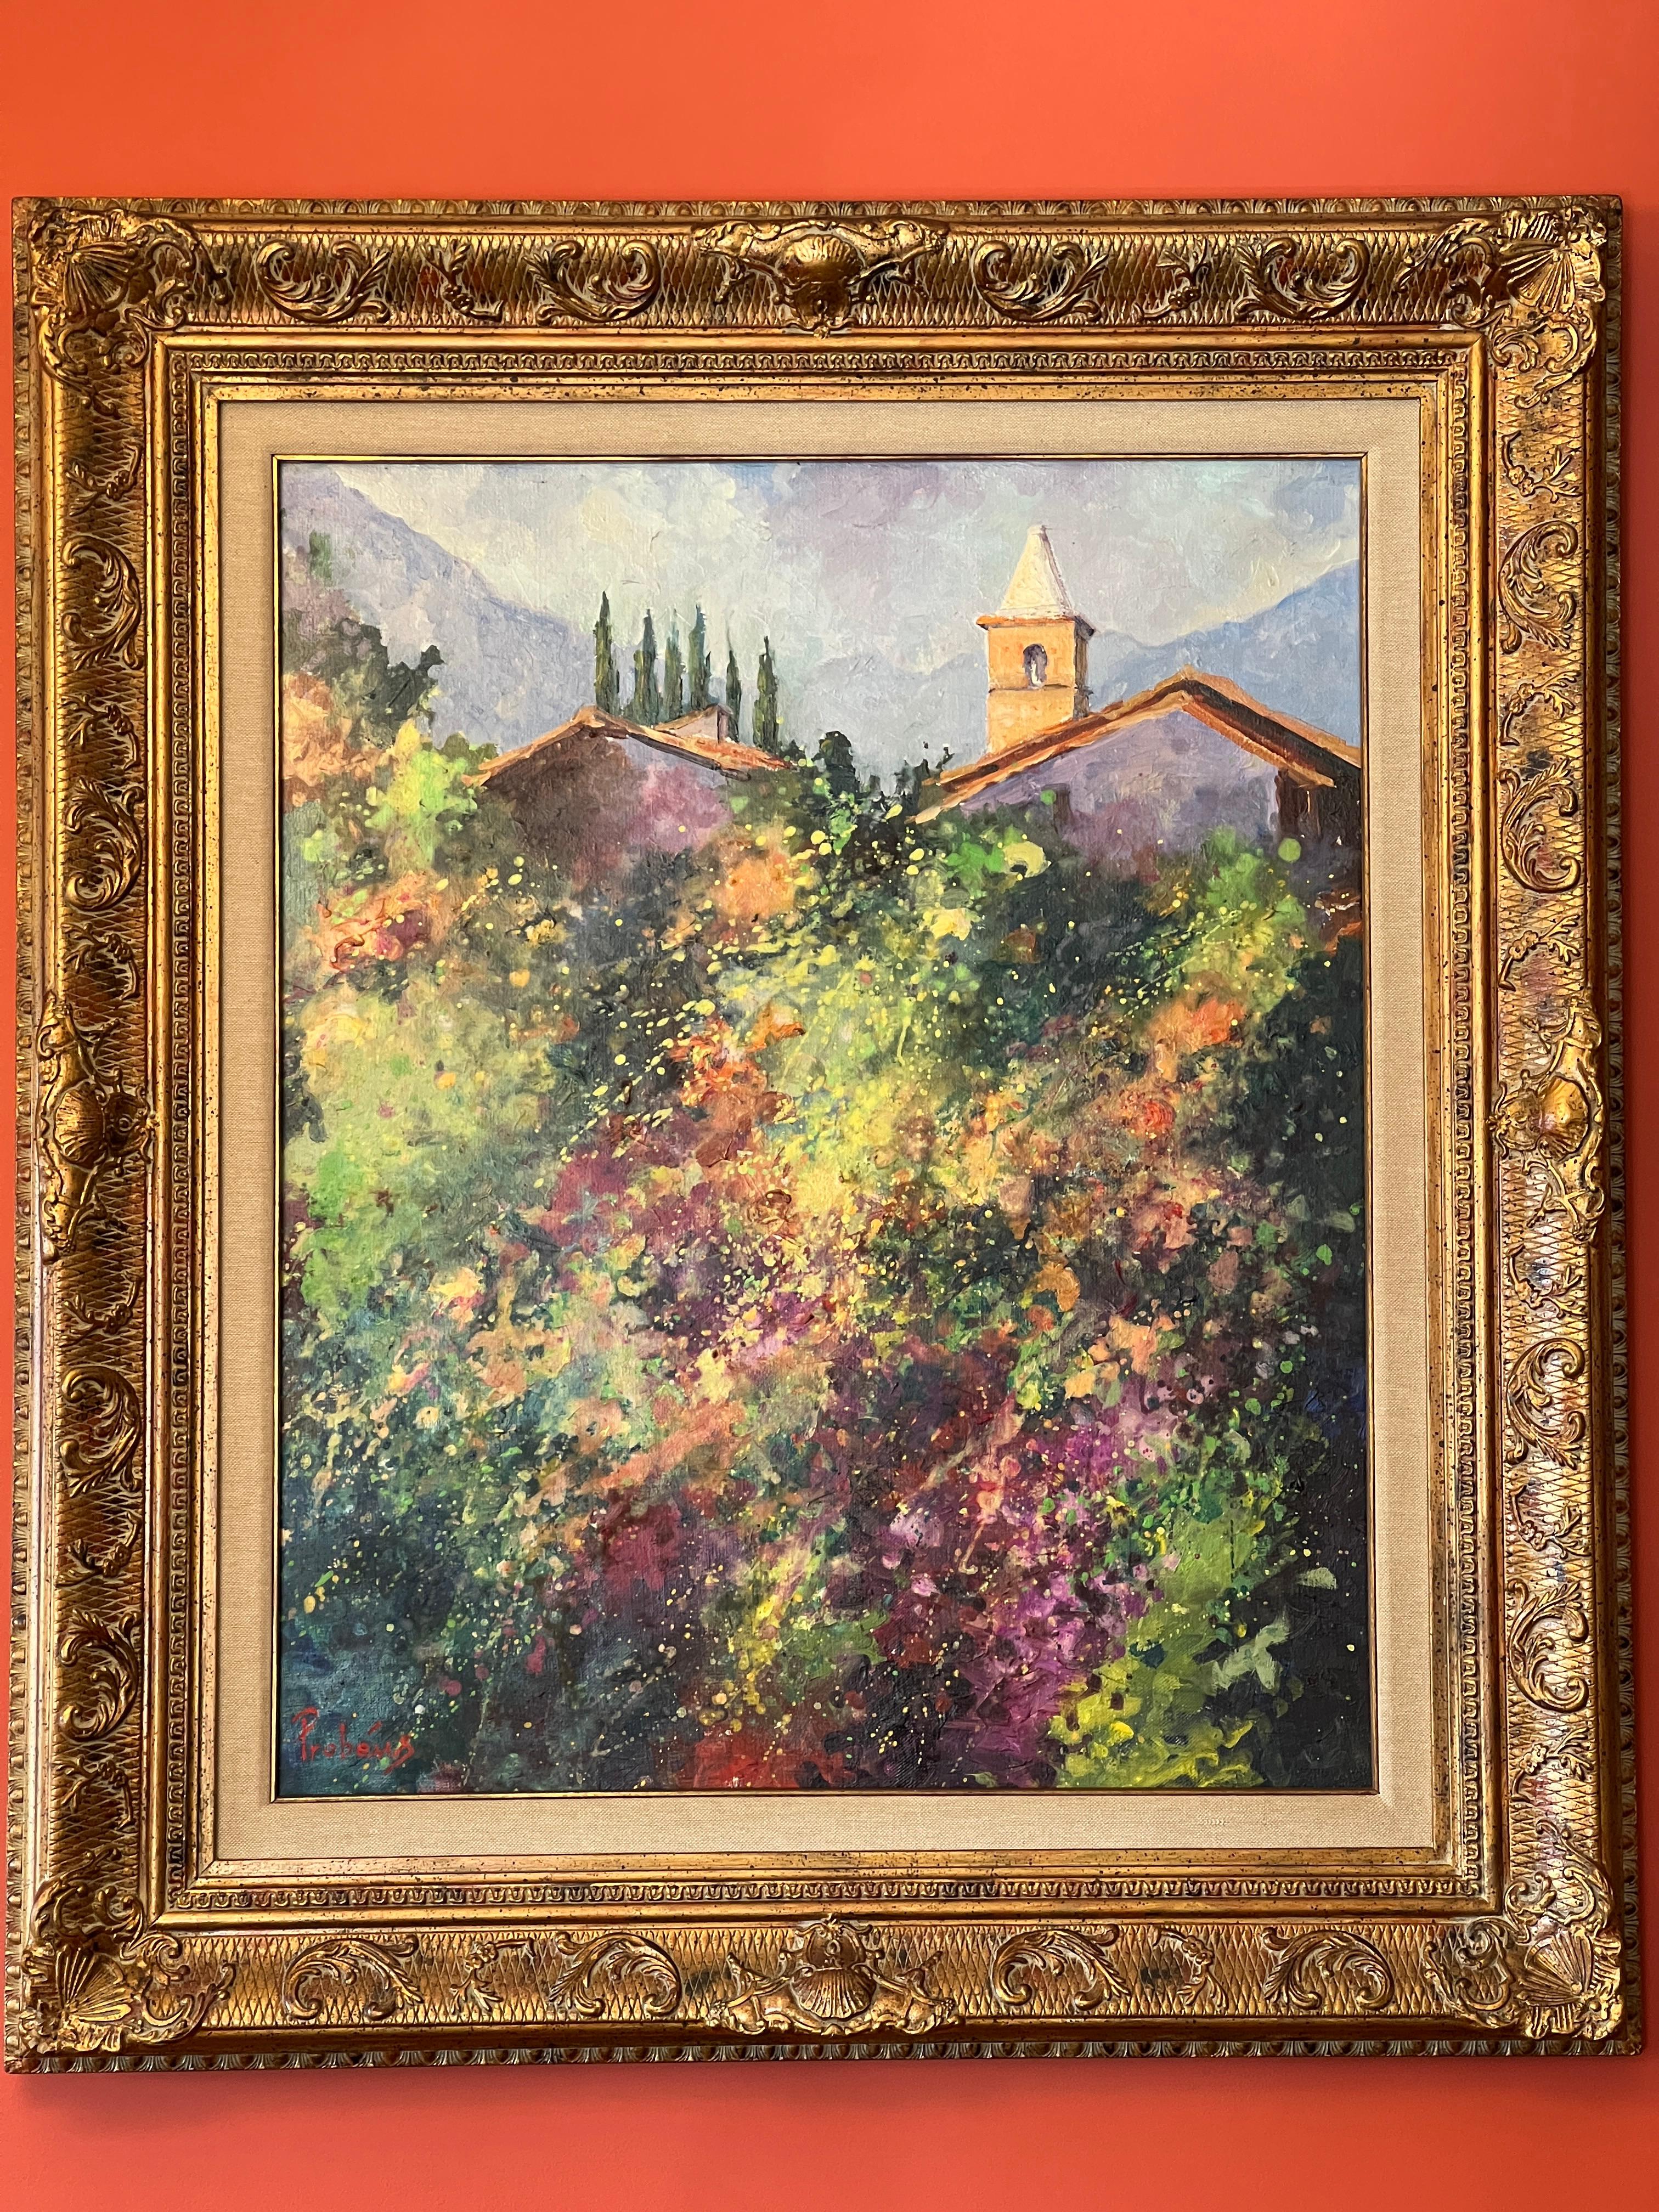  Mallorca. original acrylic painting
Onofre was born in Sant Joan Mallorca on March 4, 1930, he decided from a very young age for art in all its facets, designer, dancer, antiquarian etc. Are some of its facets before devoting itself fully to the